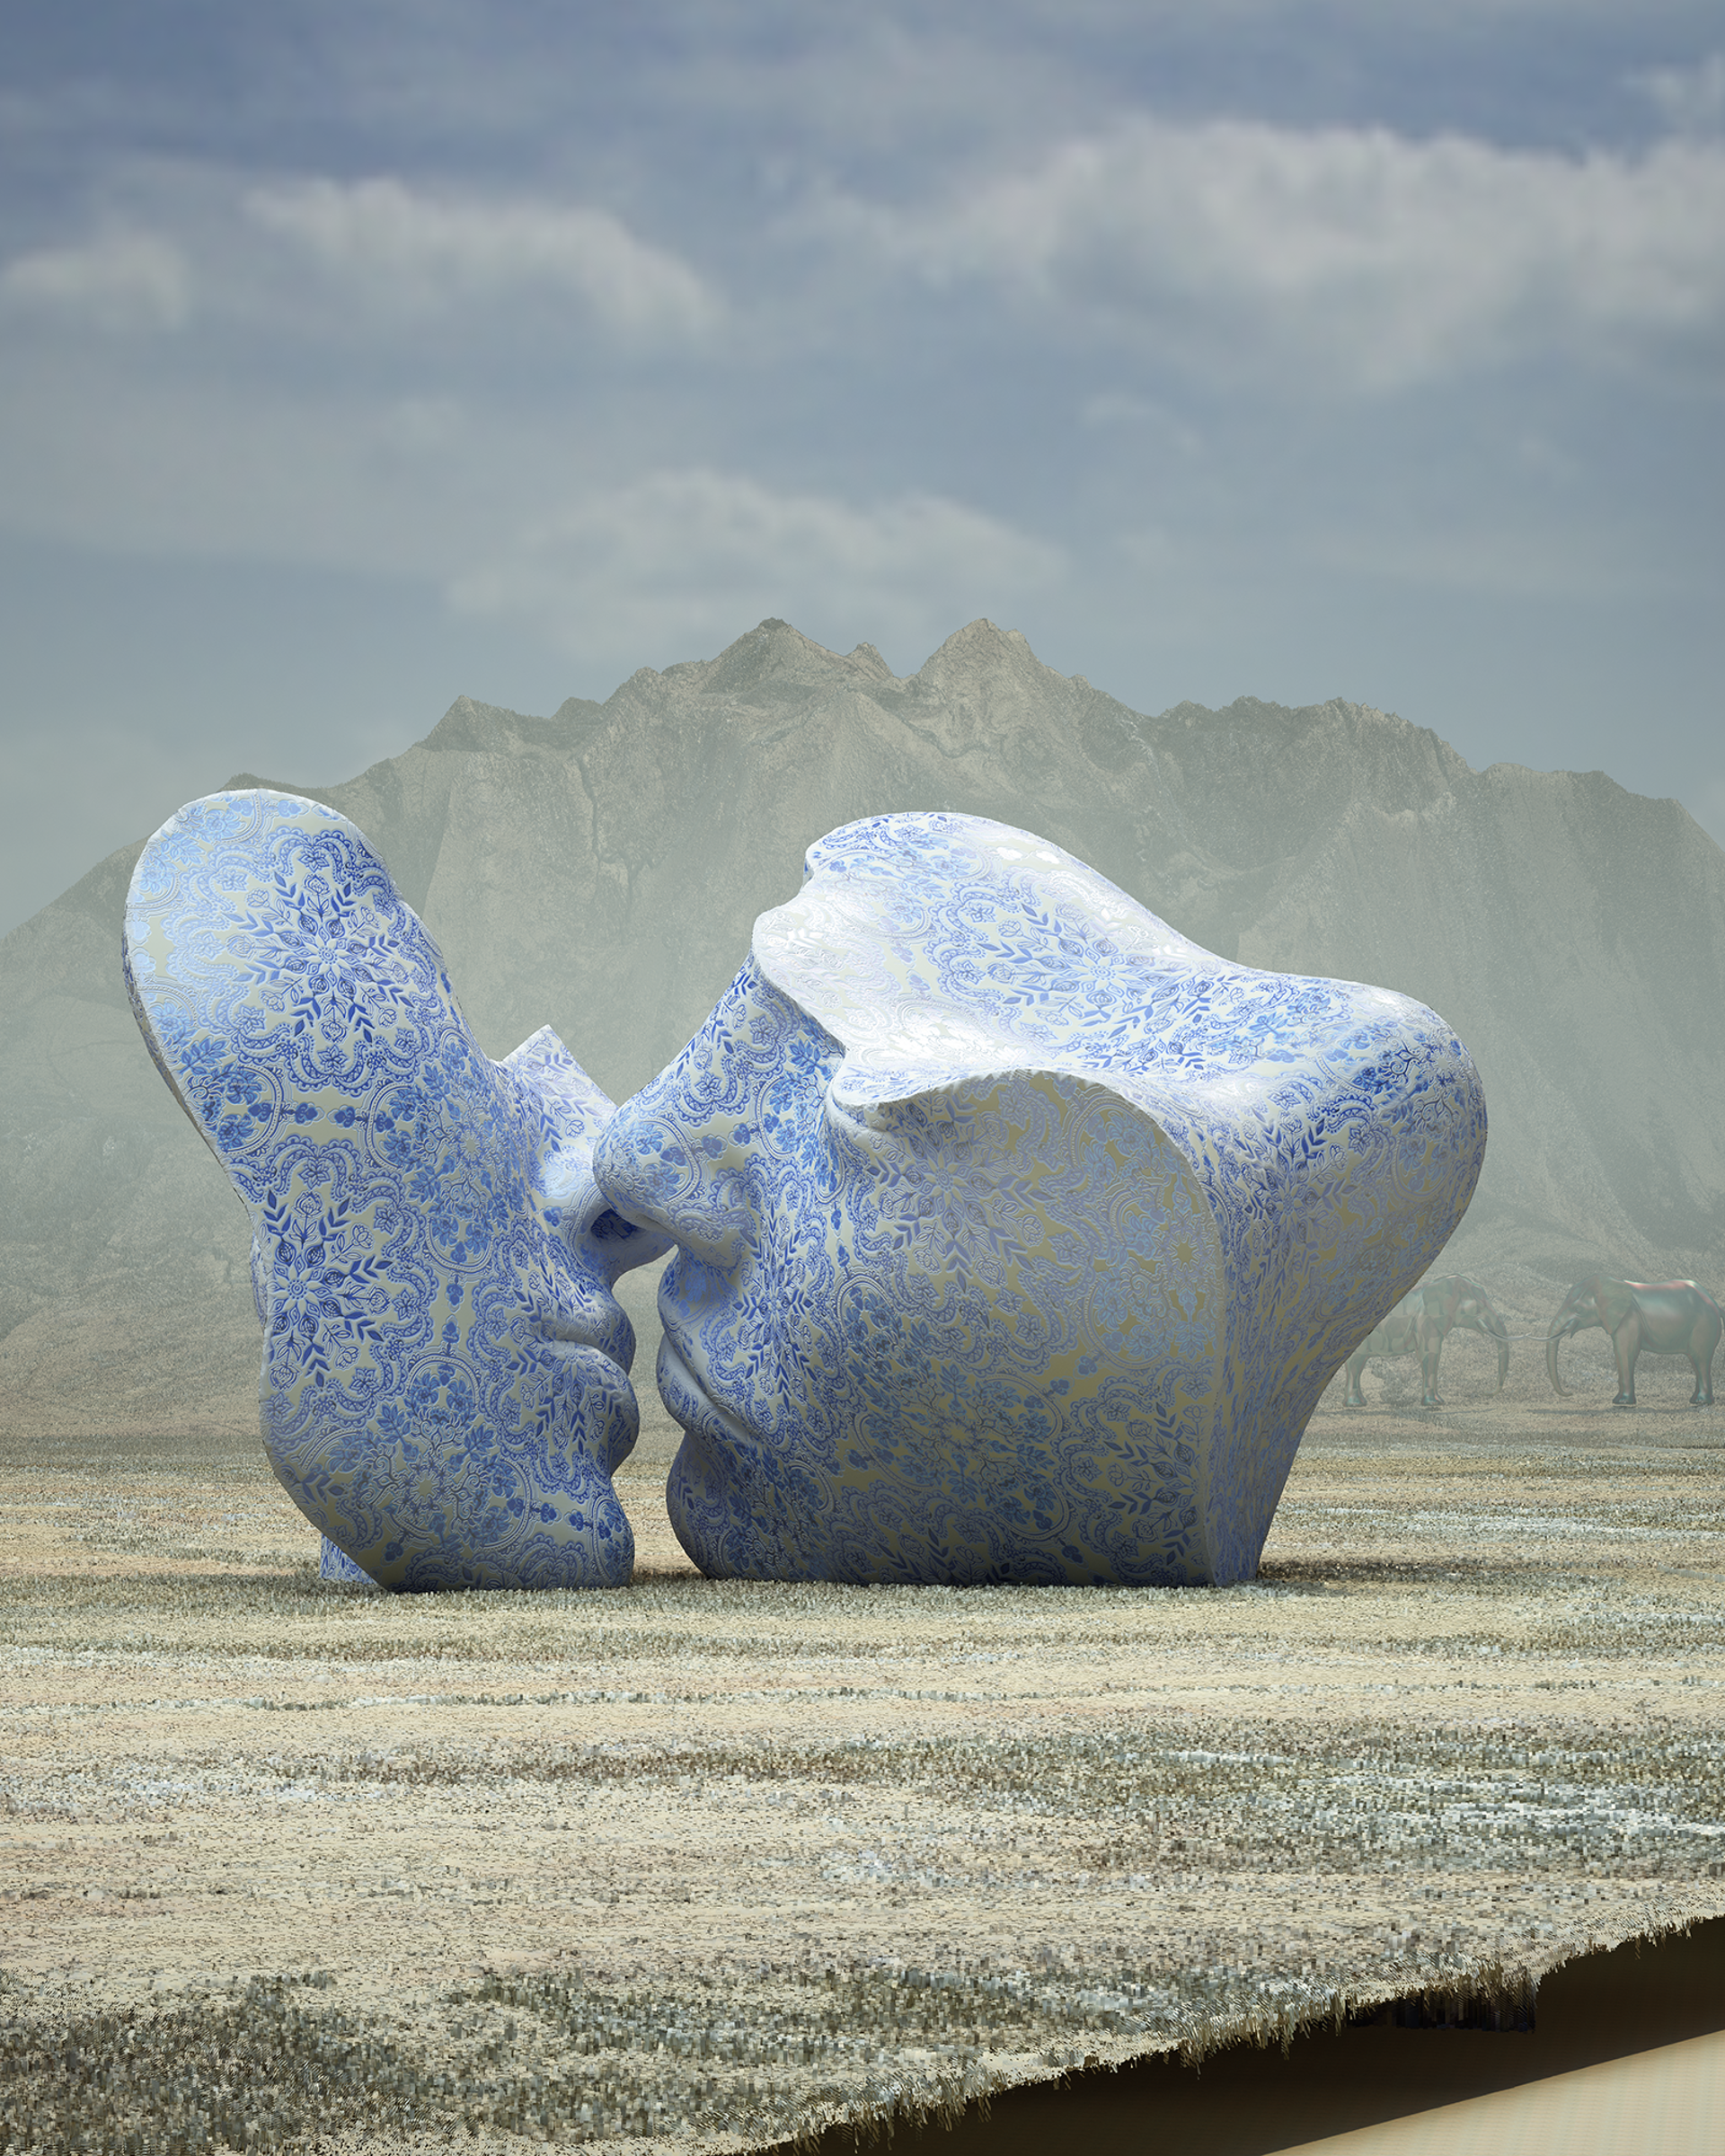 Abandoned Potential by Chad Knight